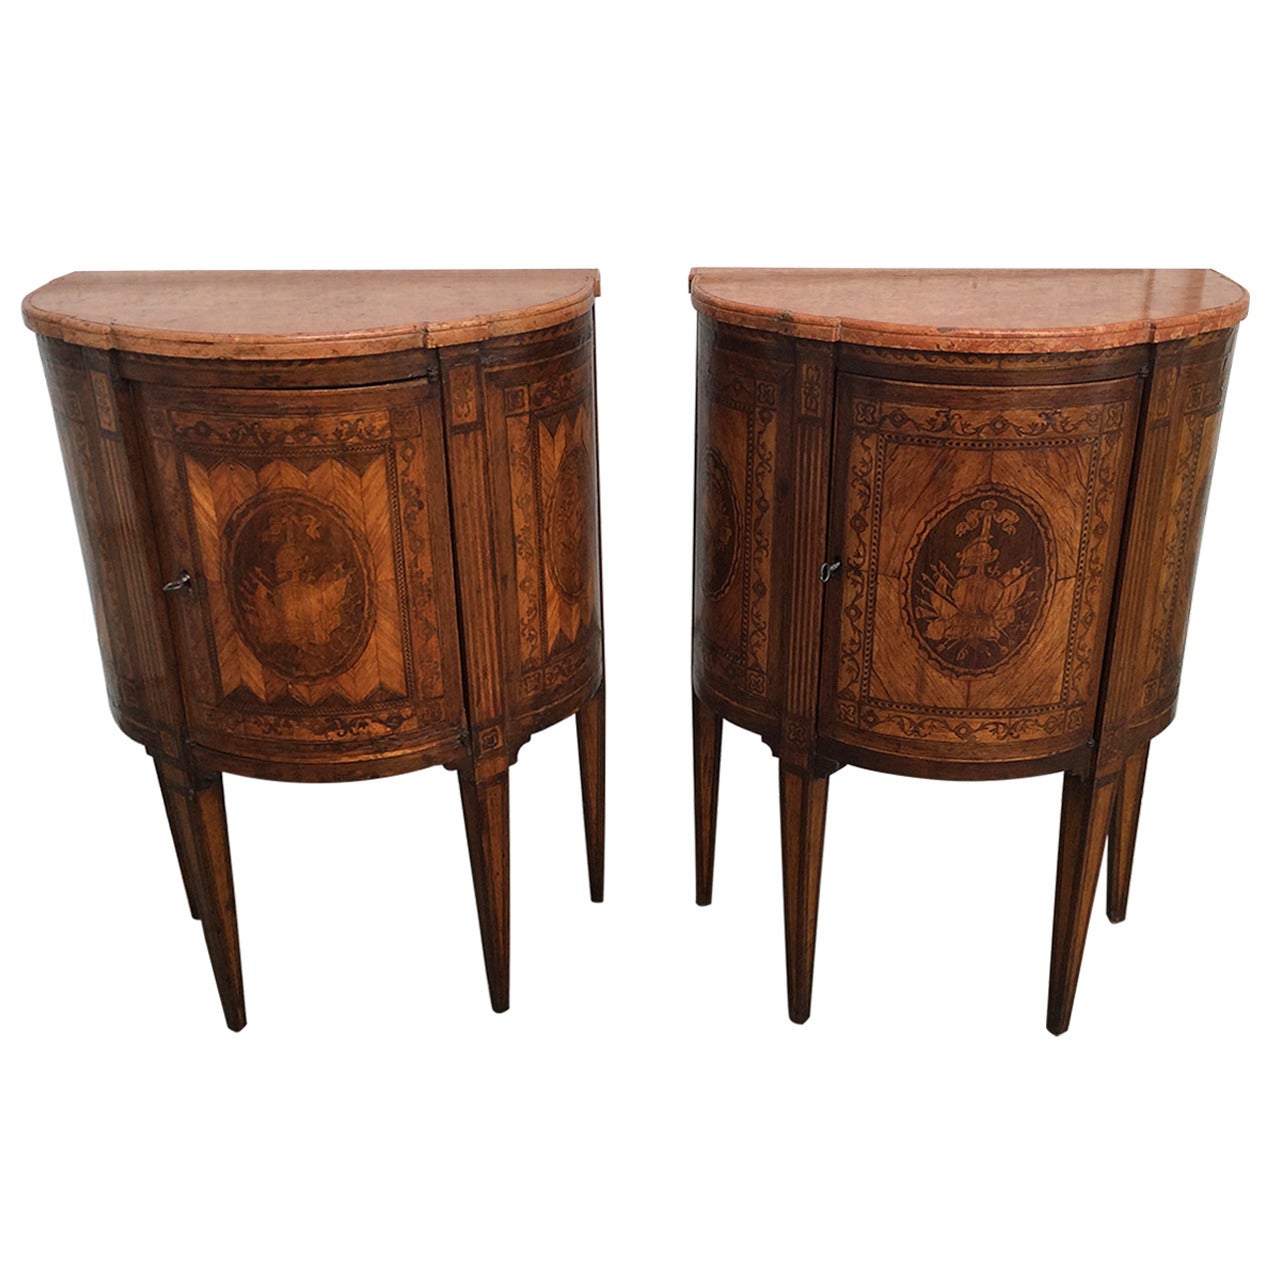 Pair of Italian Inlaid Neoclassical Night Stands